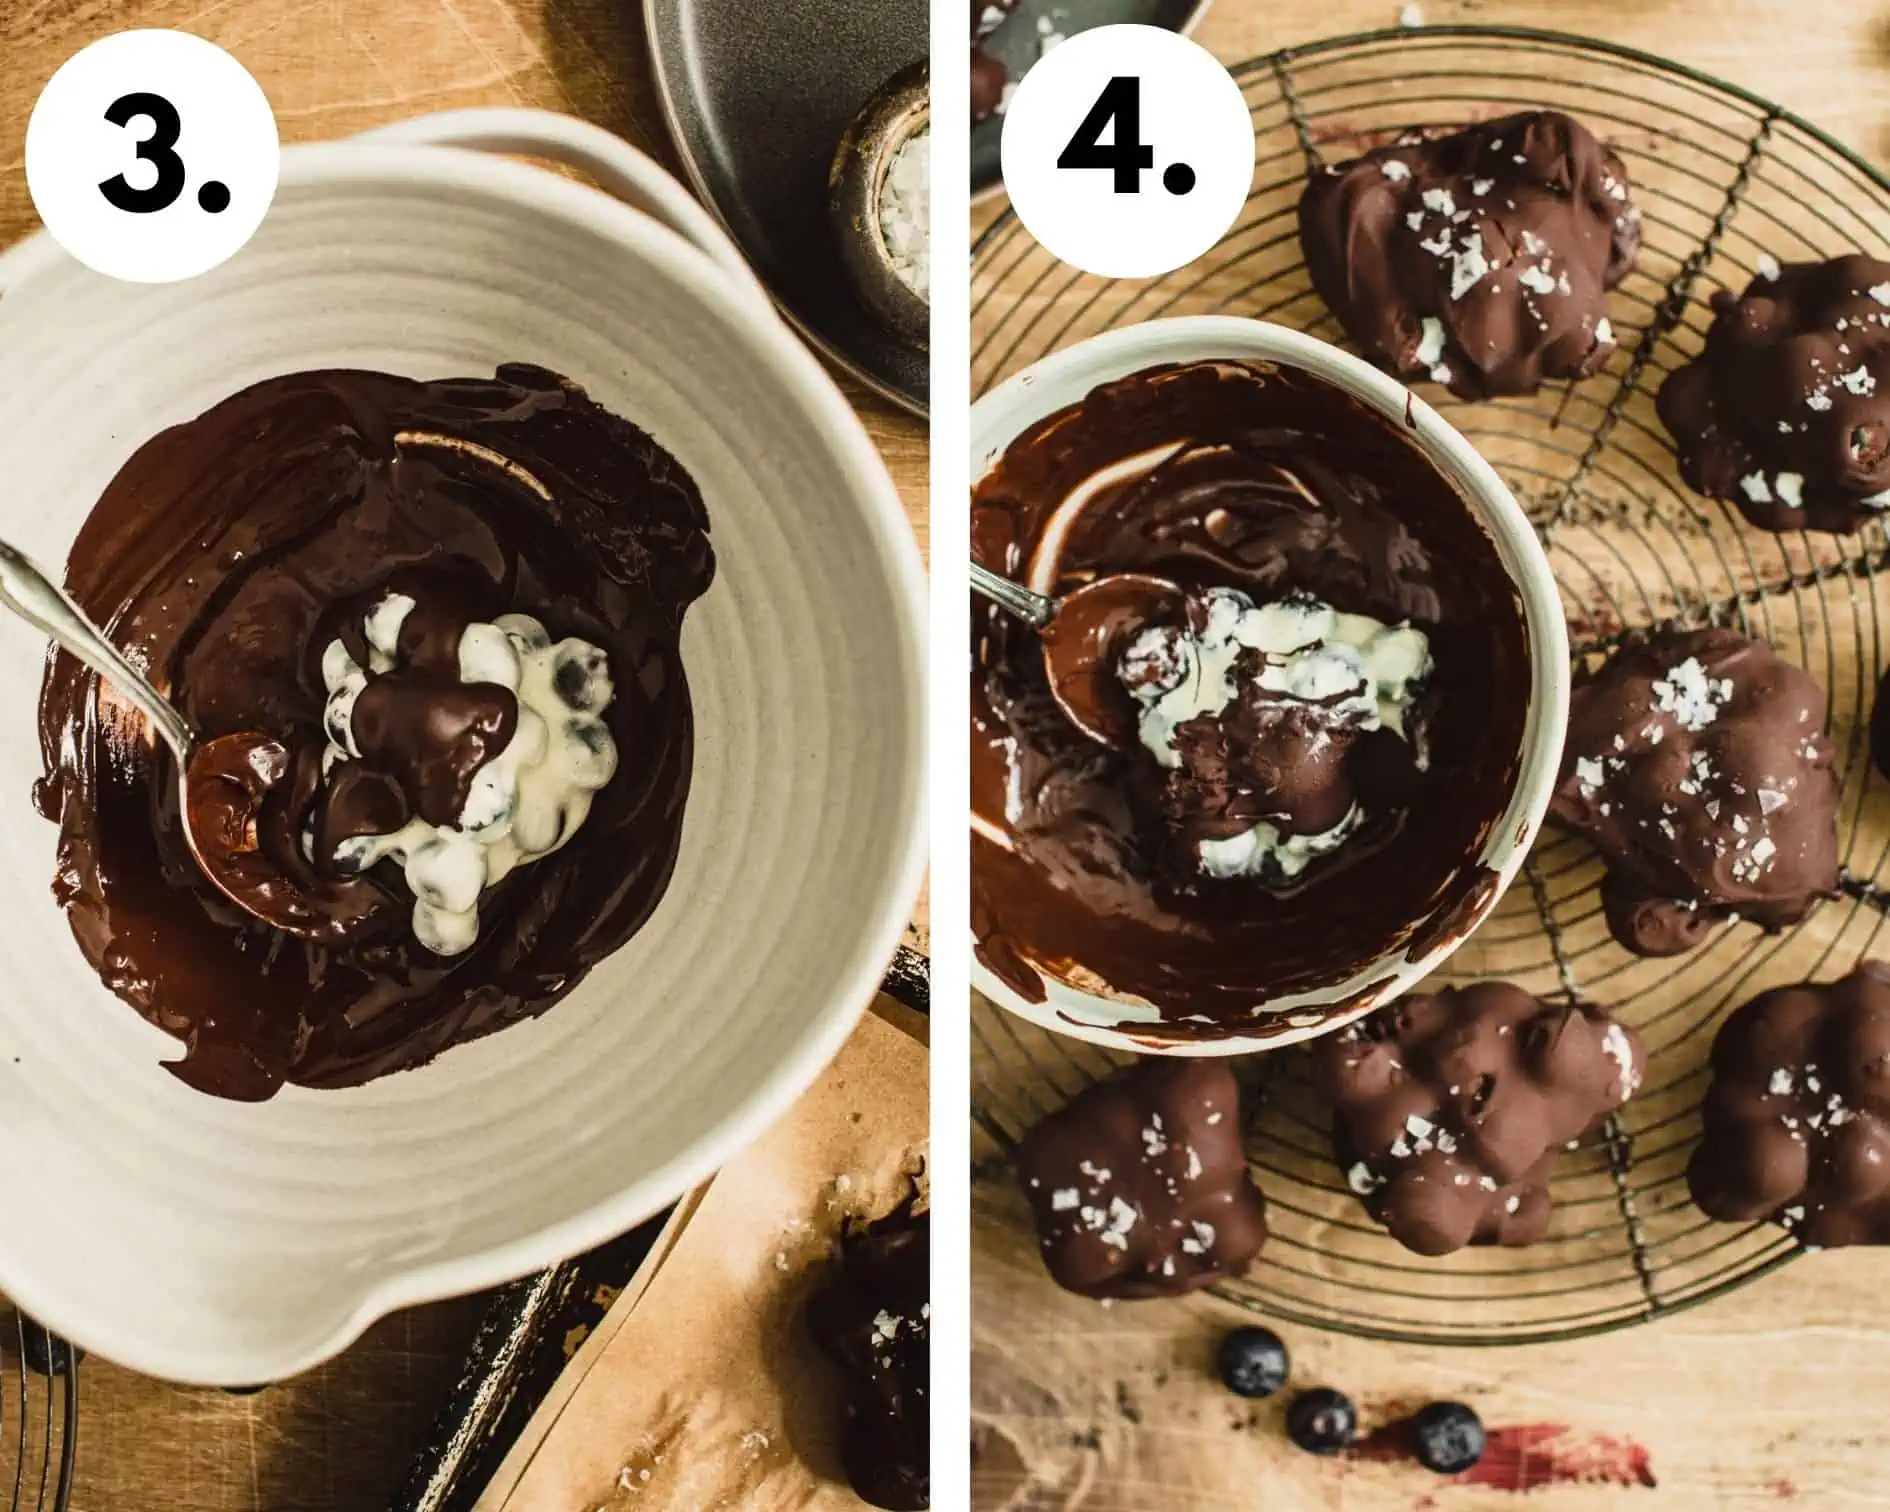 How to make chocolate covered blueberries steps 3 and 4.